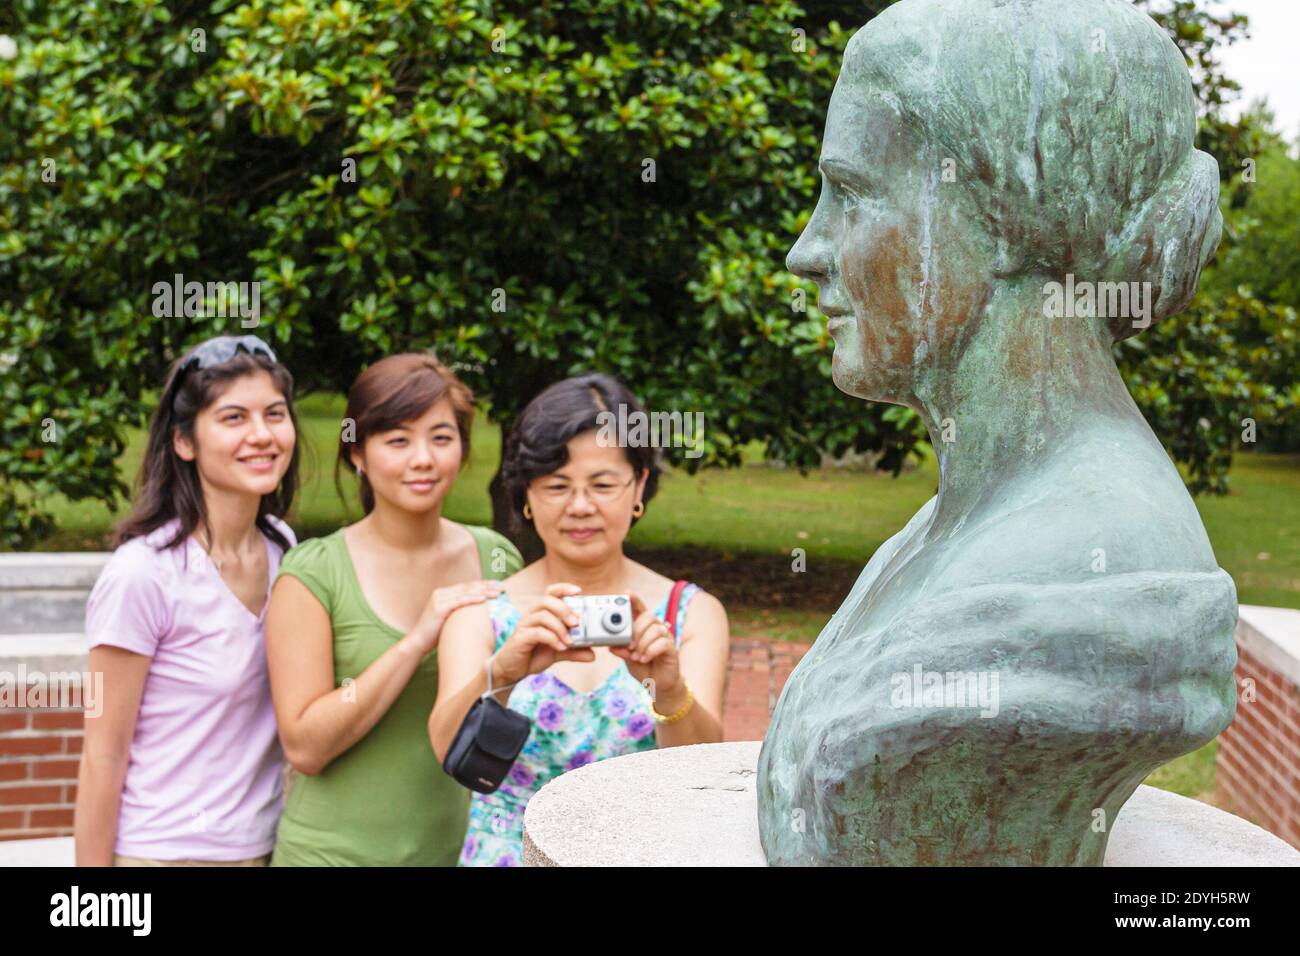 Alabama Tuscumbia Ivy Green Helen Keller birthplace,Asian women mother adult daughters taking photo bust, Stock Photo